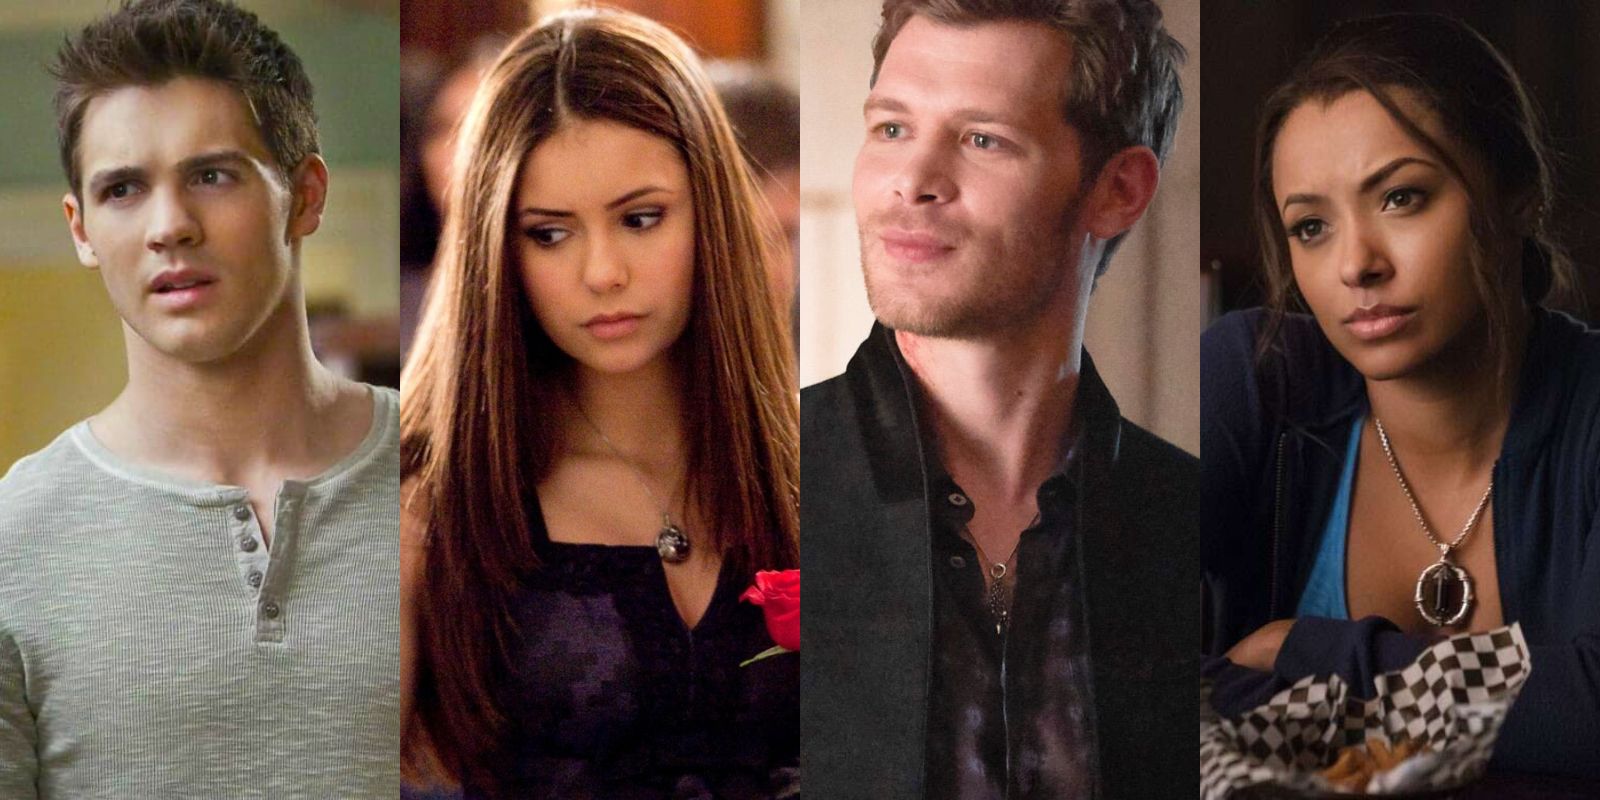 The Vampire Diaries: 10 Best "Roast" Quotes From The Main Characters